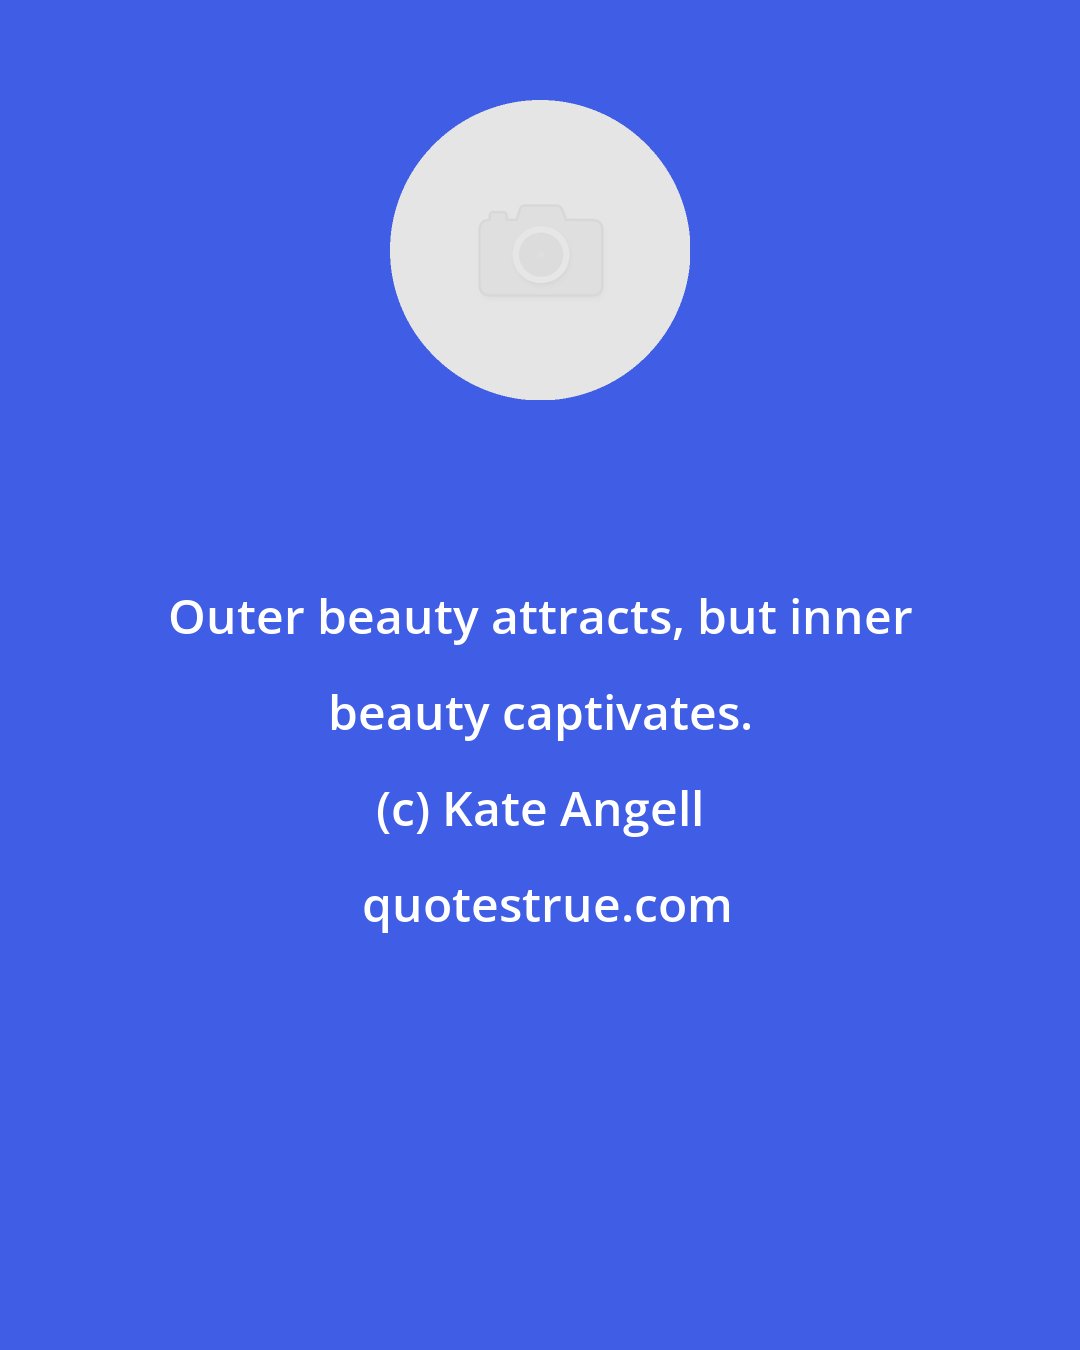 Kate Angell: Outer beauty attracts, but inner beauty captivates.